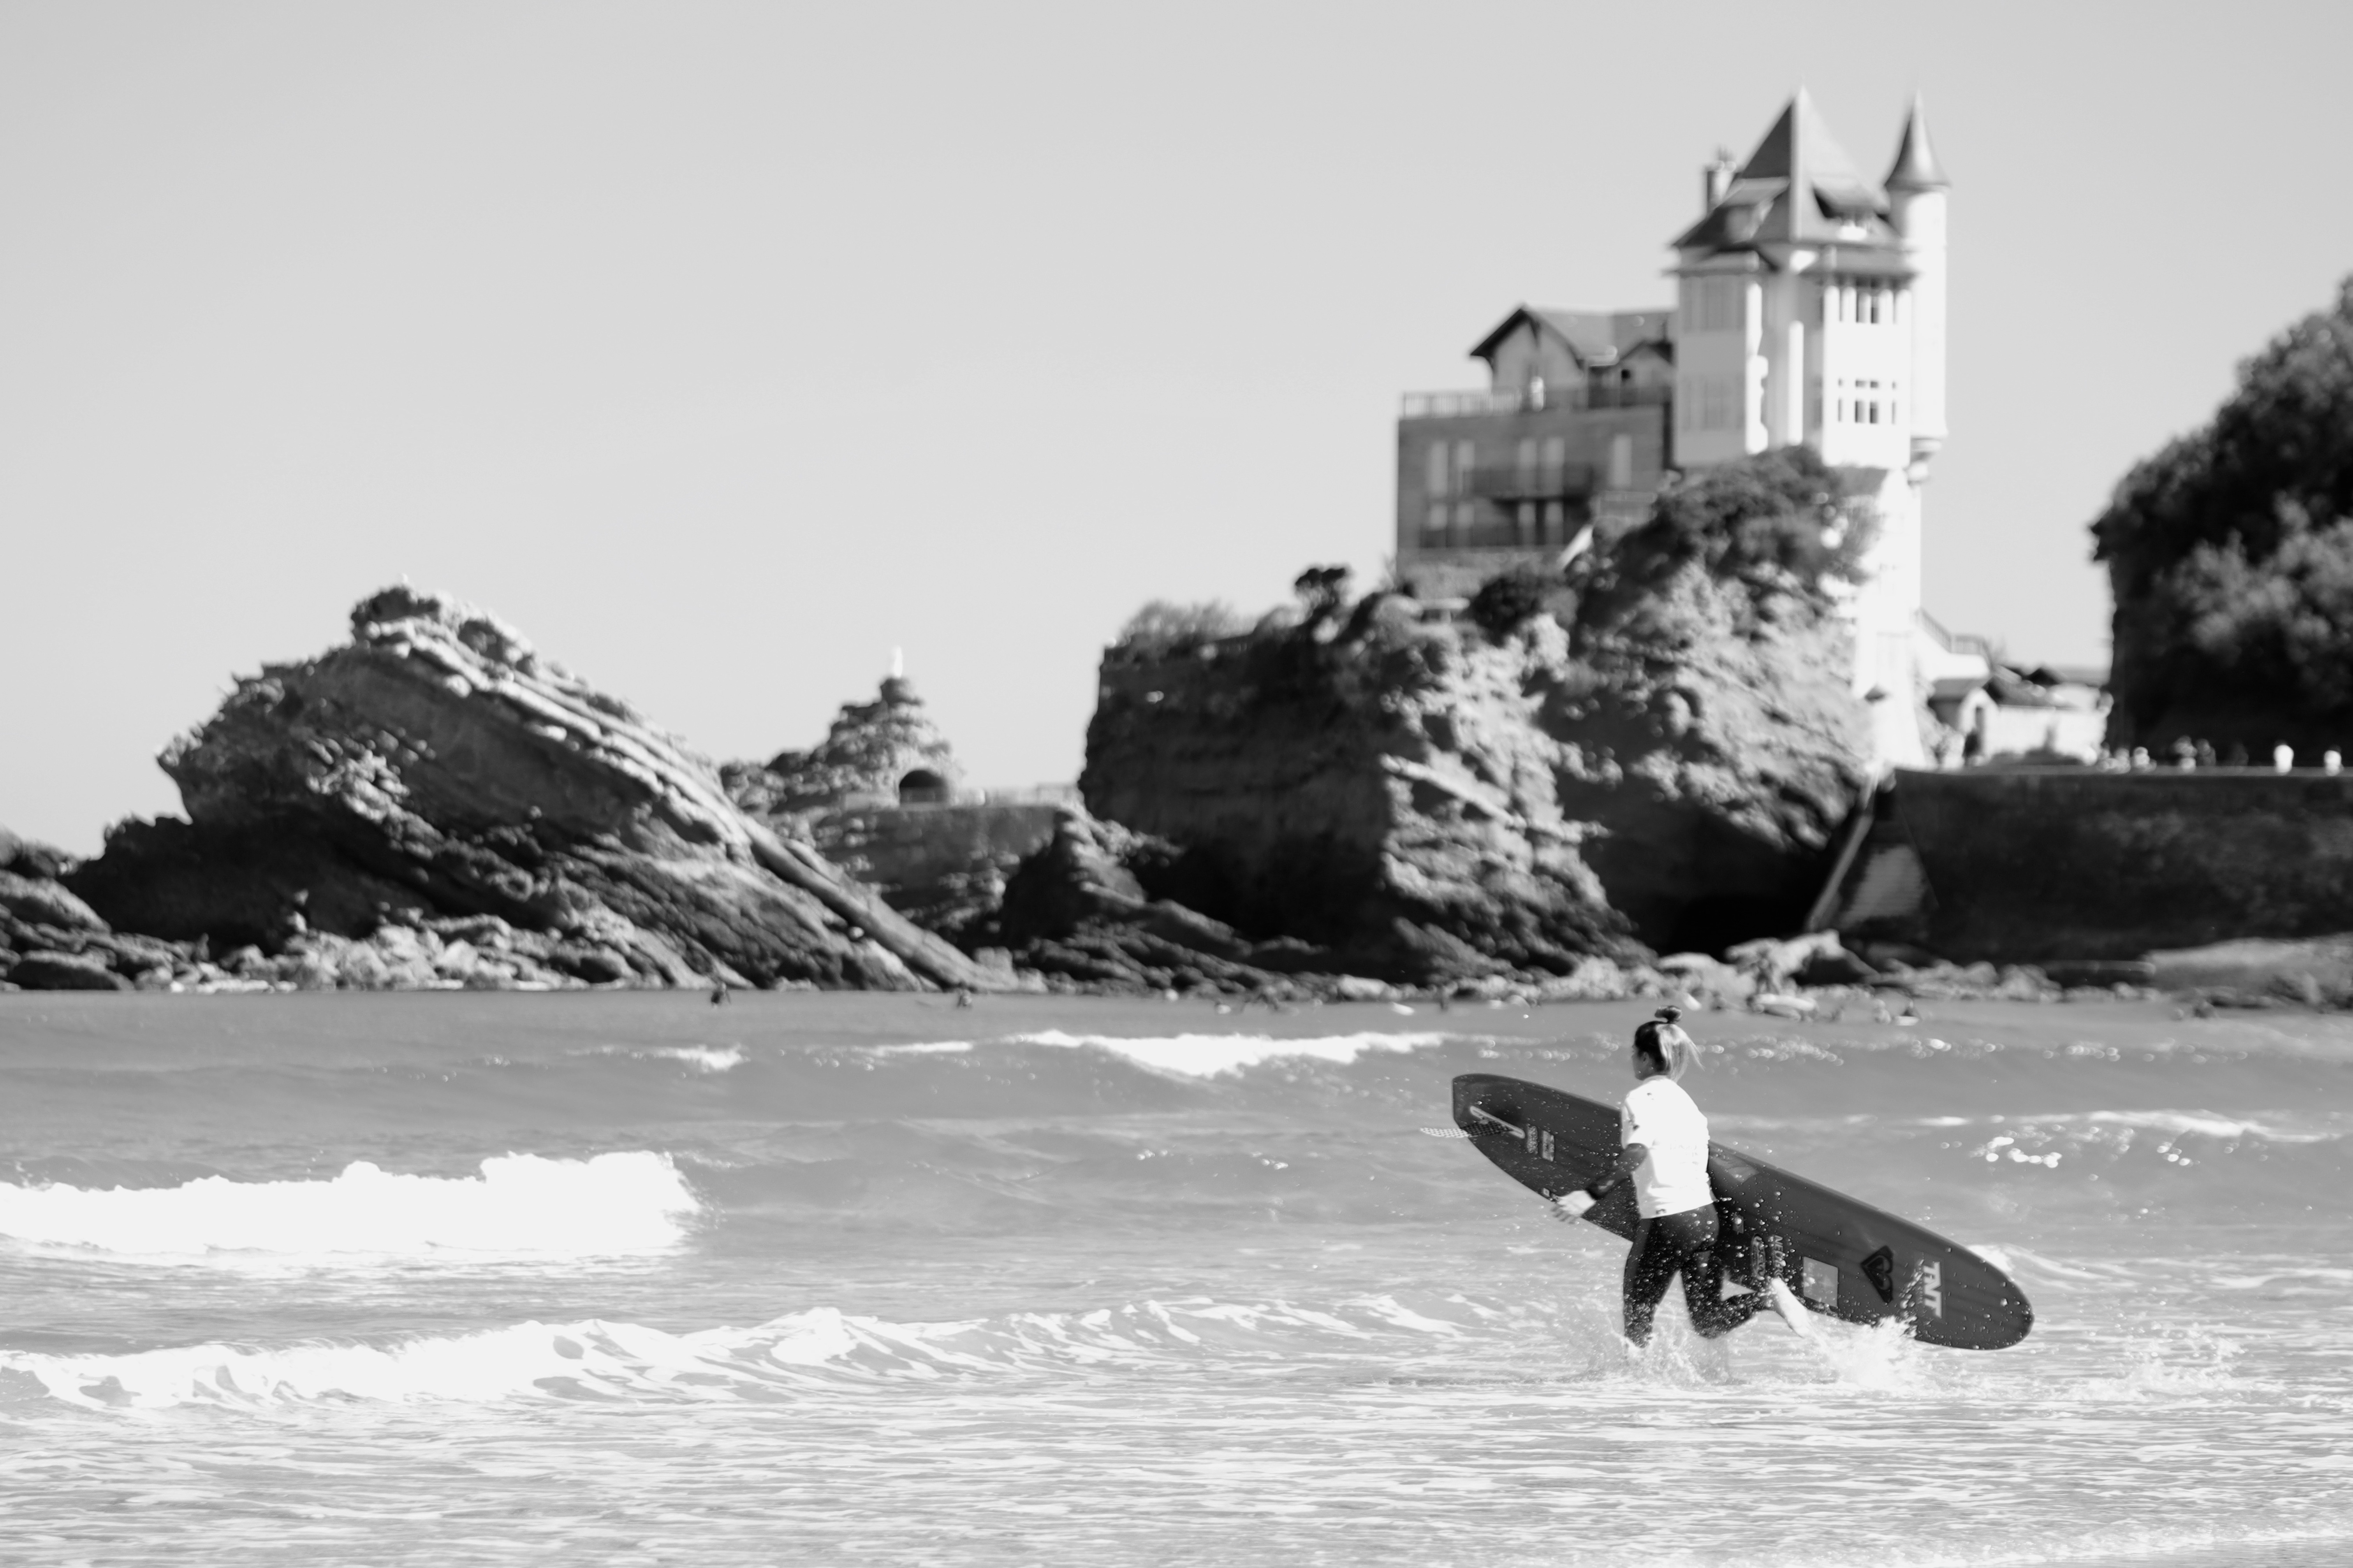 Biarritz Teen Surf and Language Camps